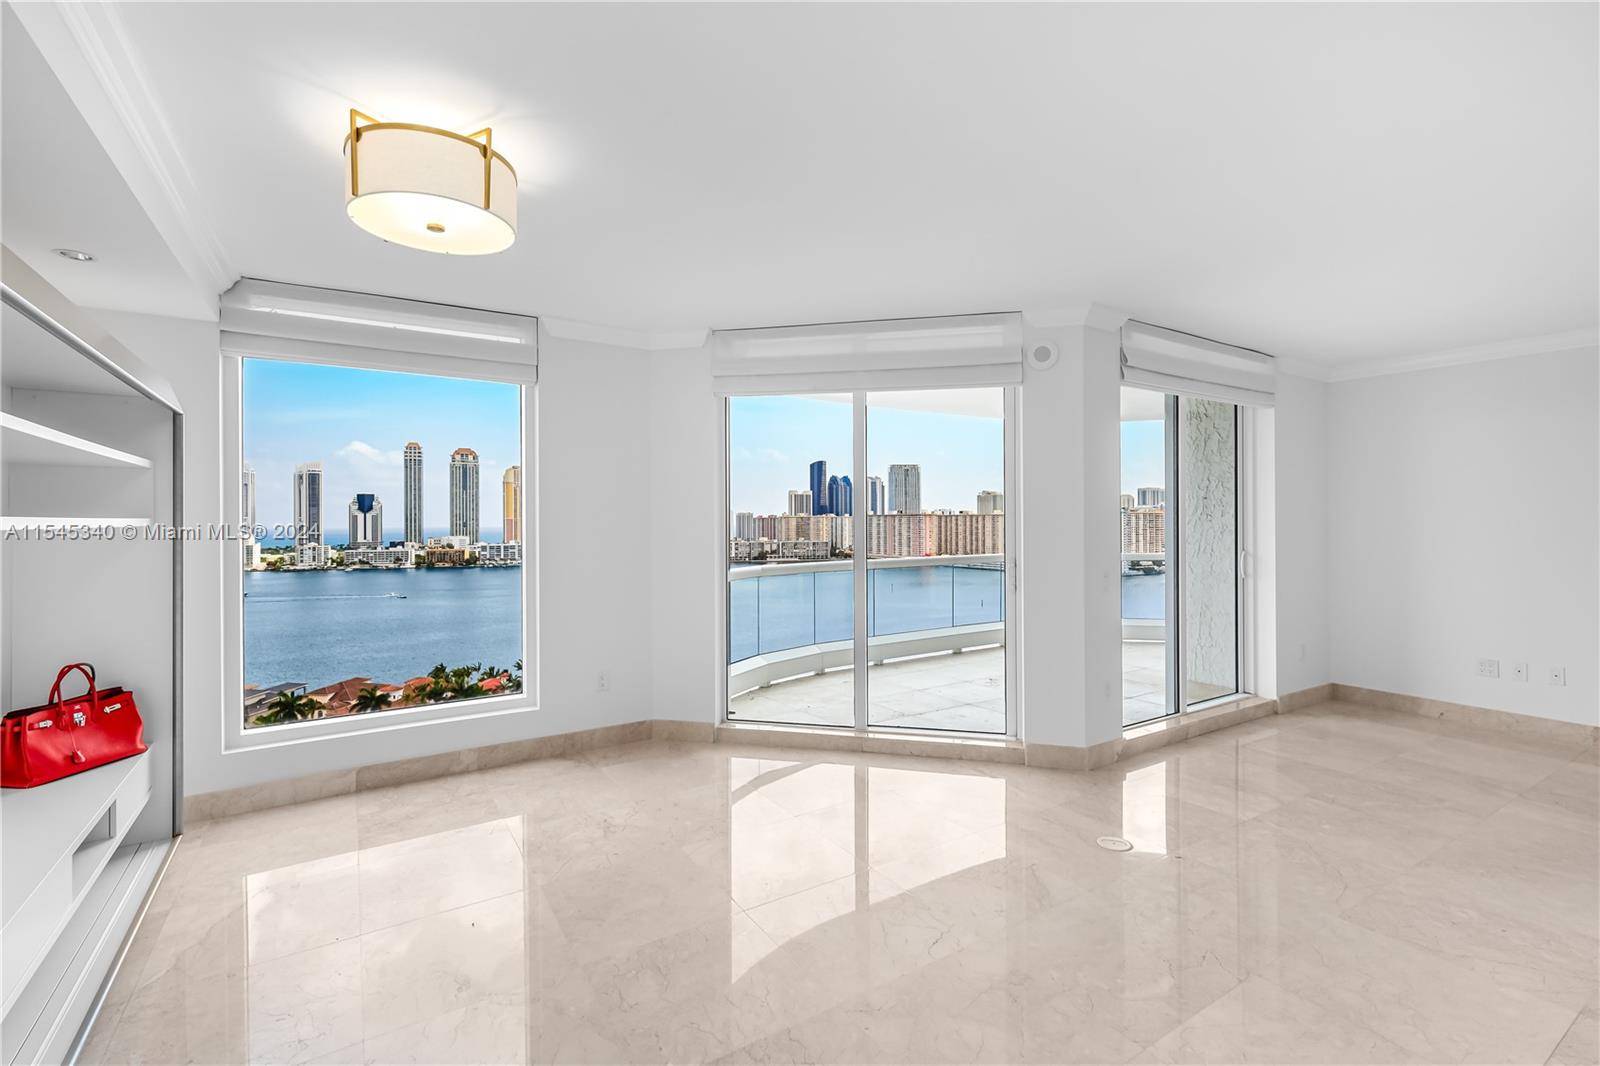 Welcome to your new luxury lifestyle at Bellamare in Aventura, FL !